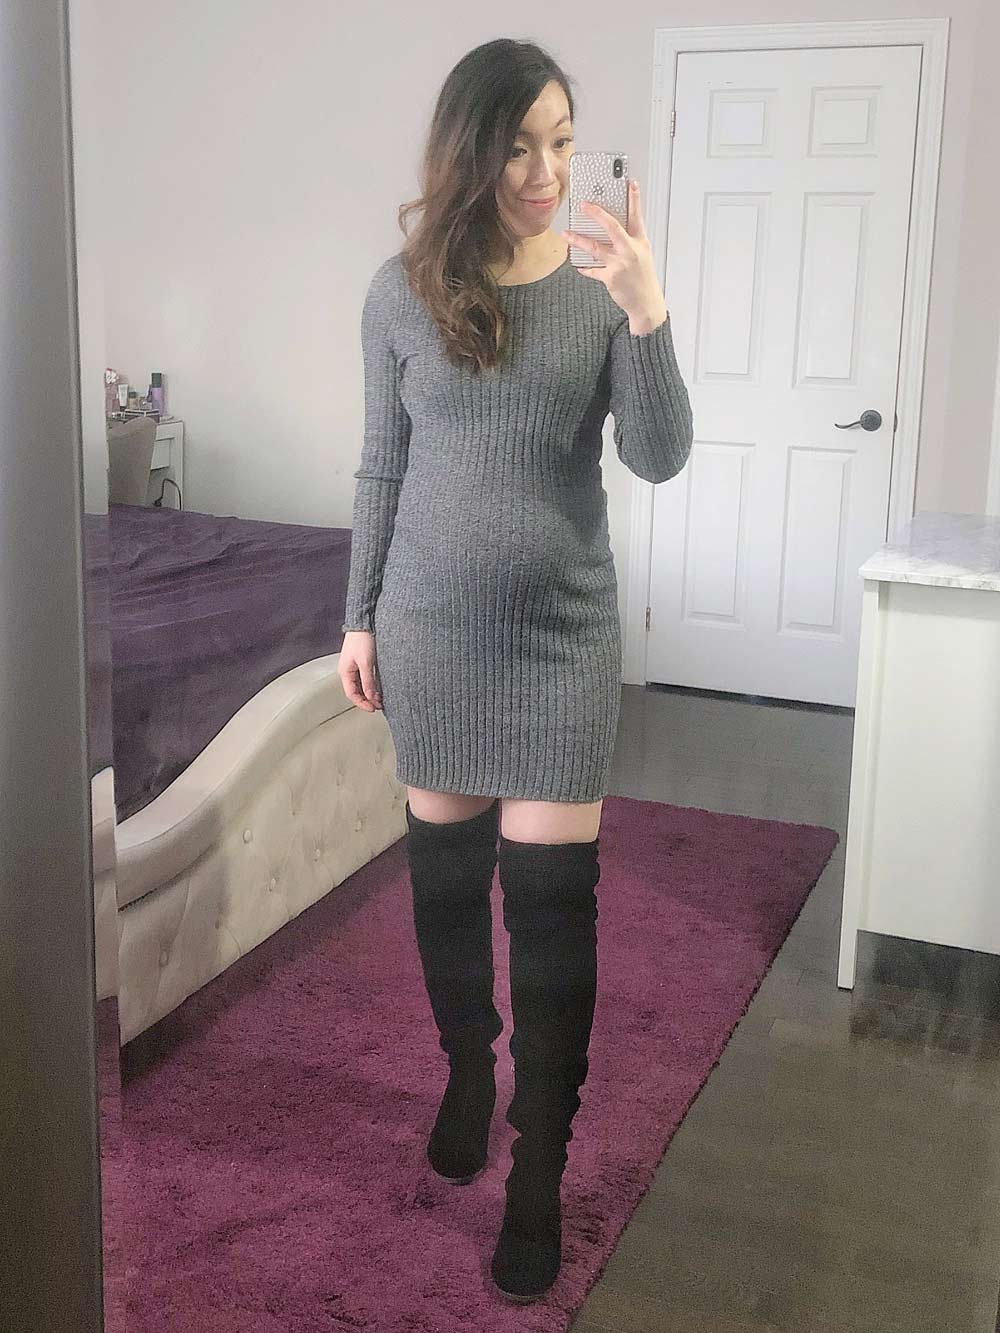 How to Look Stylish During Pregnancy - Bodycon Dress